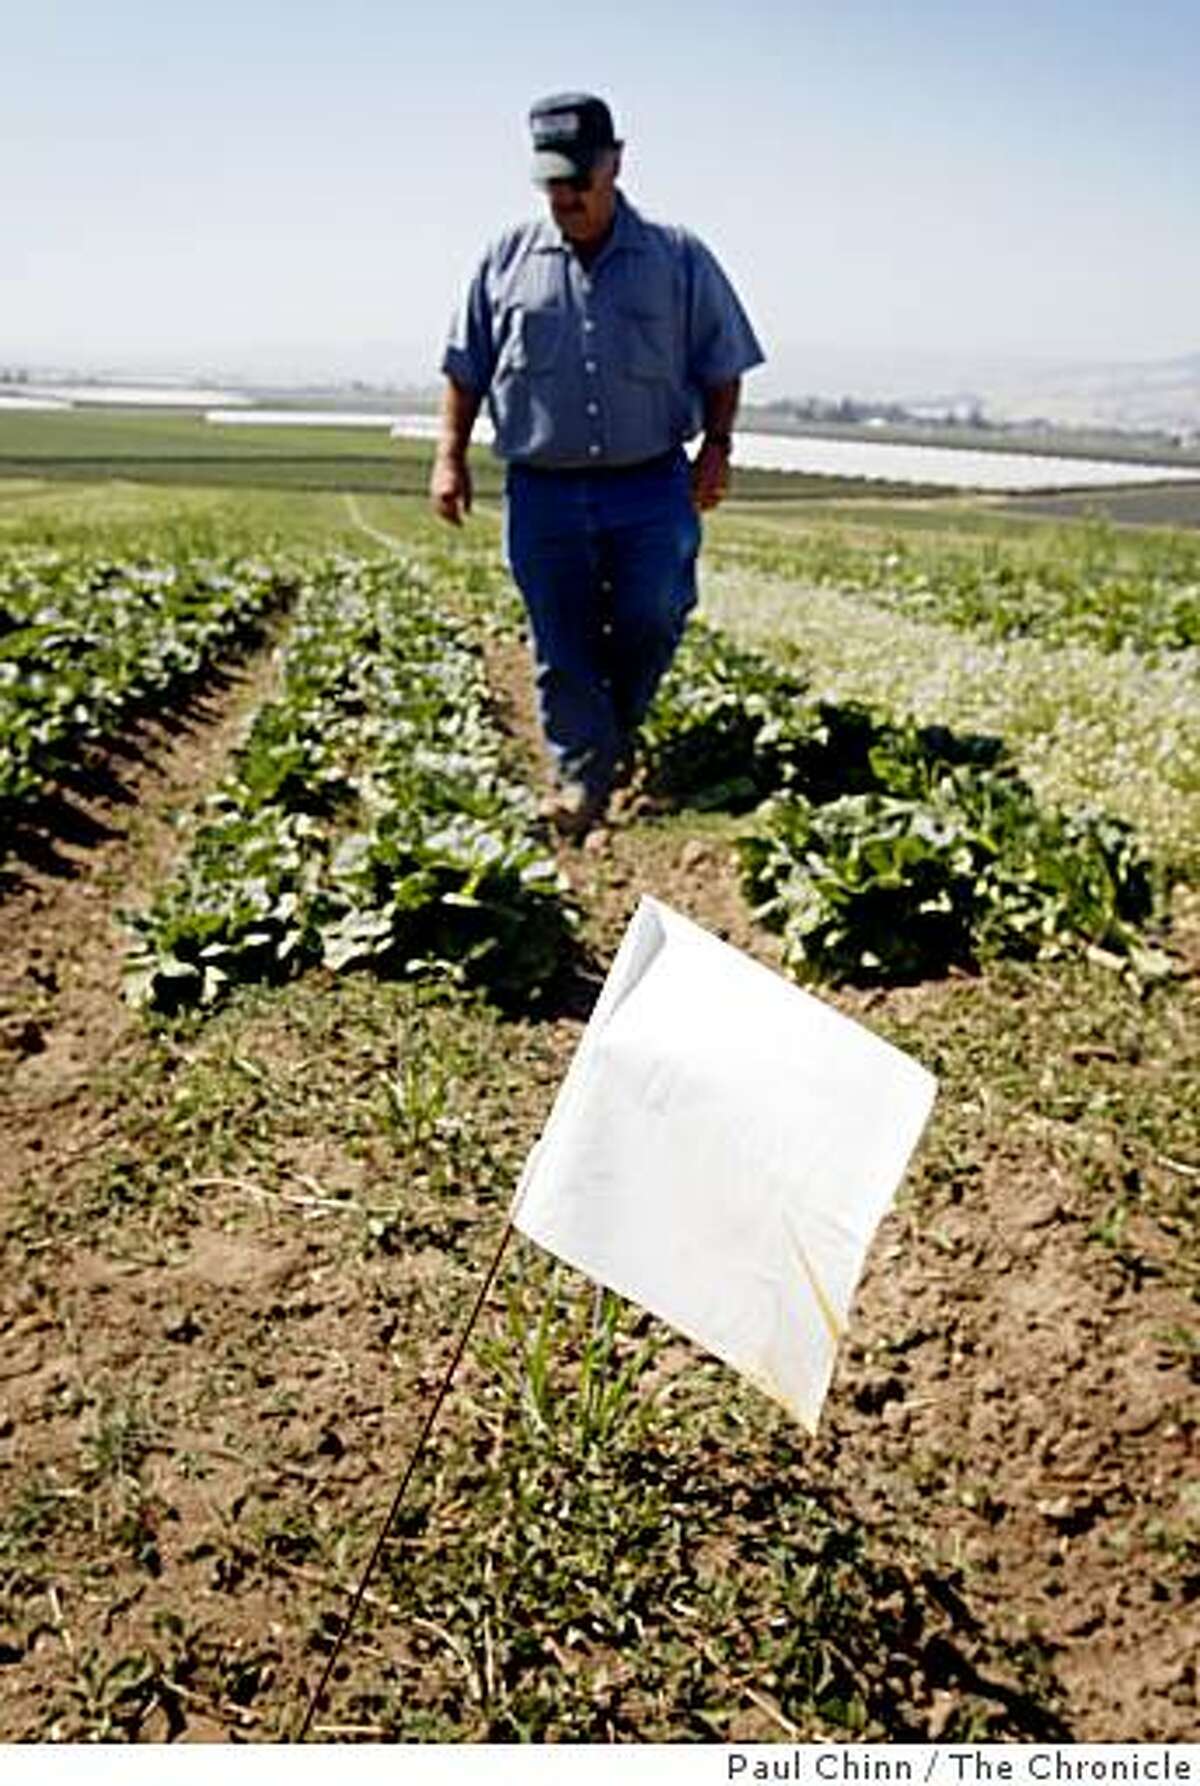 Organic farmer Dick Peixoto walks through an unharvested section of a lettuce field at Lakeside Organic Gardens Farm in Aromas, Calif., on Thursday, July 2, 2009. White flags mark the areas that can't be harvested as a precaution to prevent e. coli contamination after a deer was spotted wandering through the field a few weeks ago.